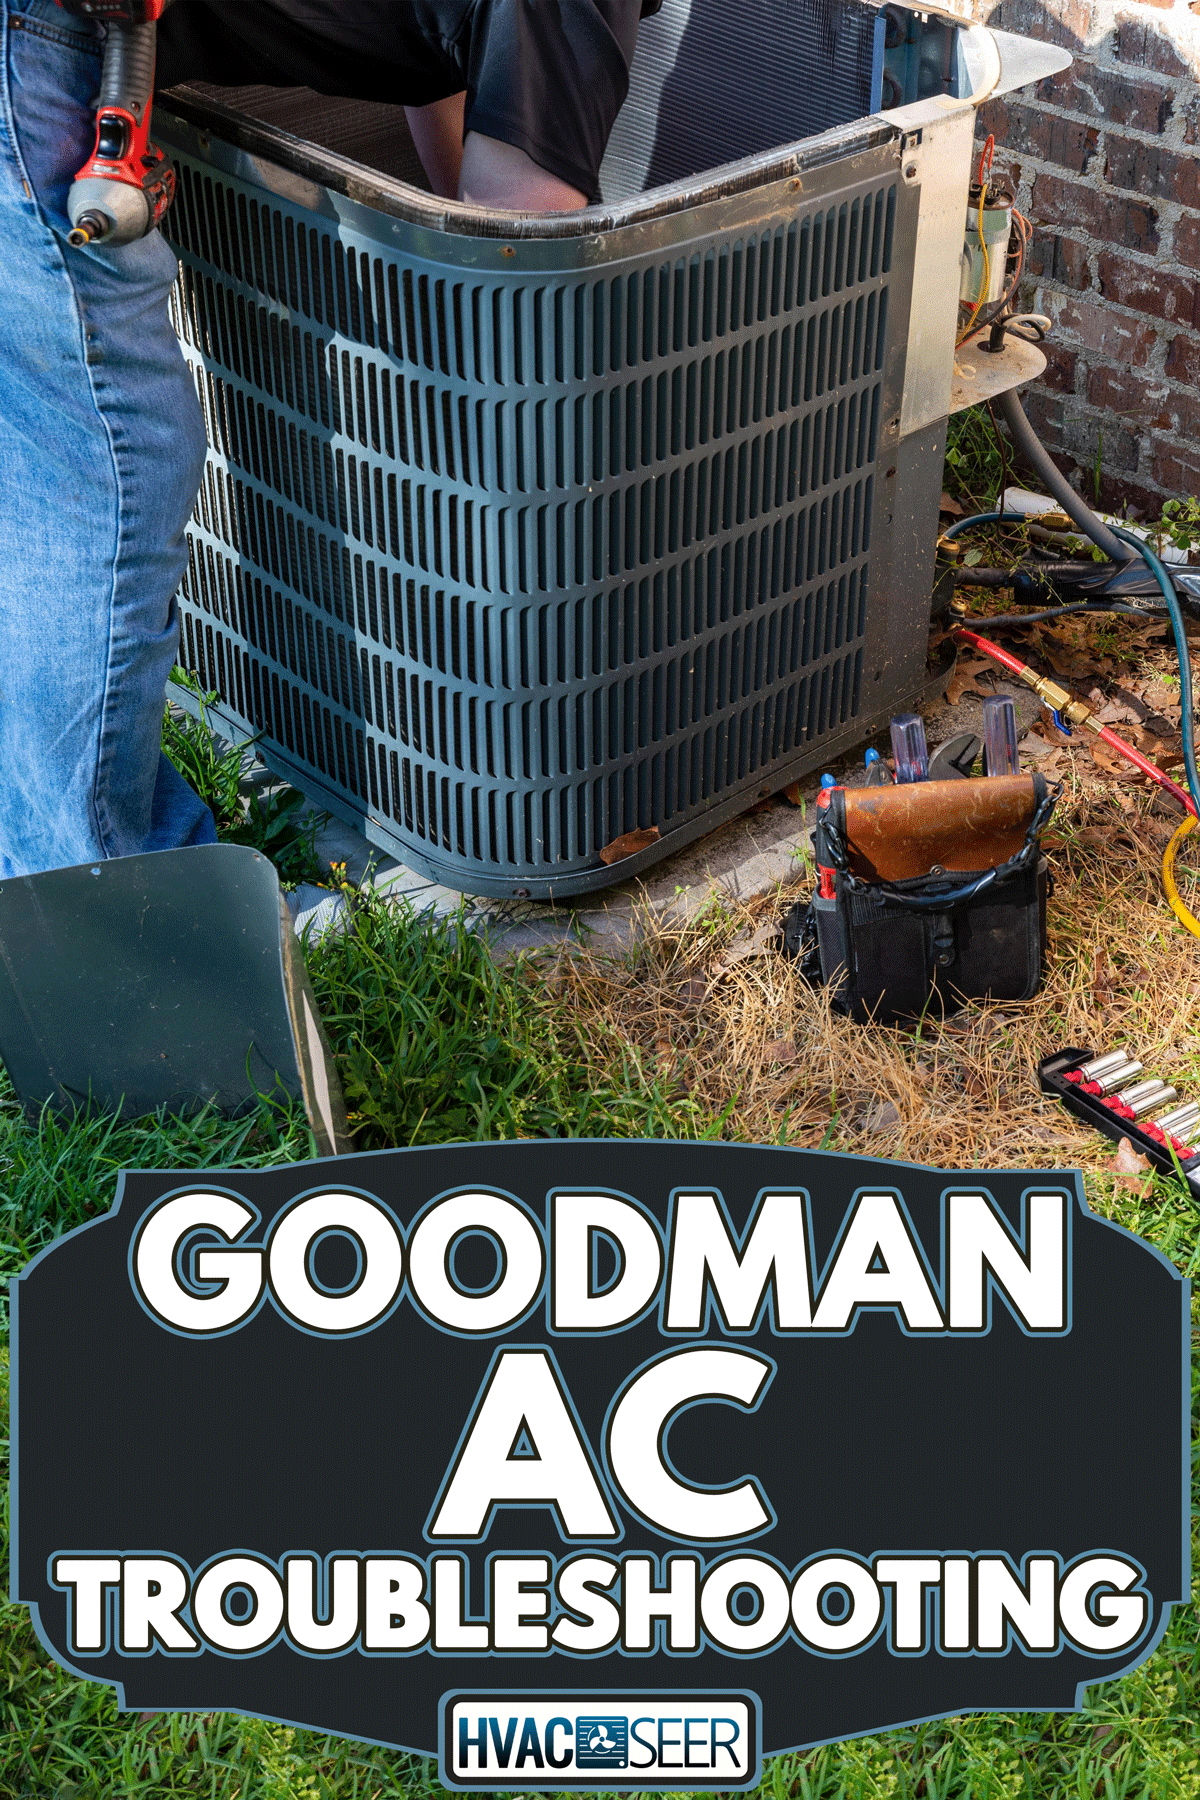 Air conditioner maintenance being performed, Goodman AC Troubleshooting